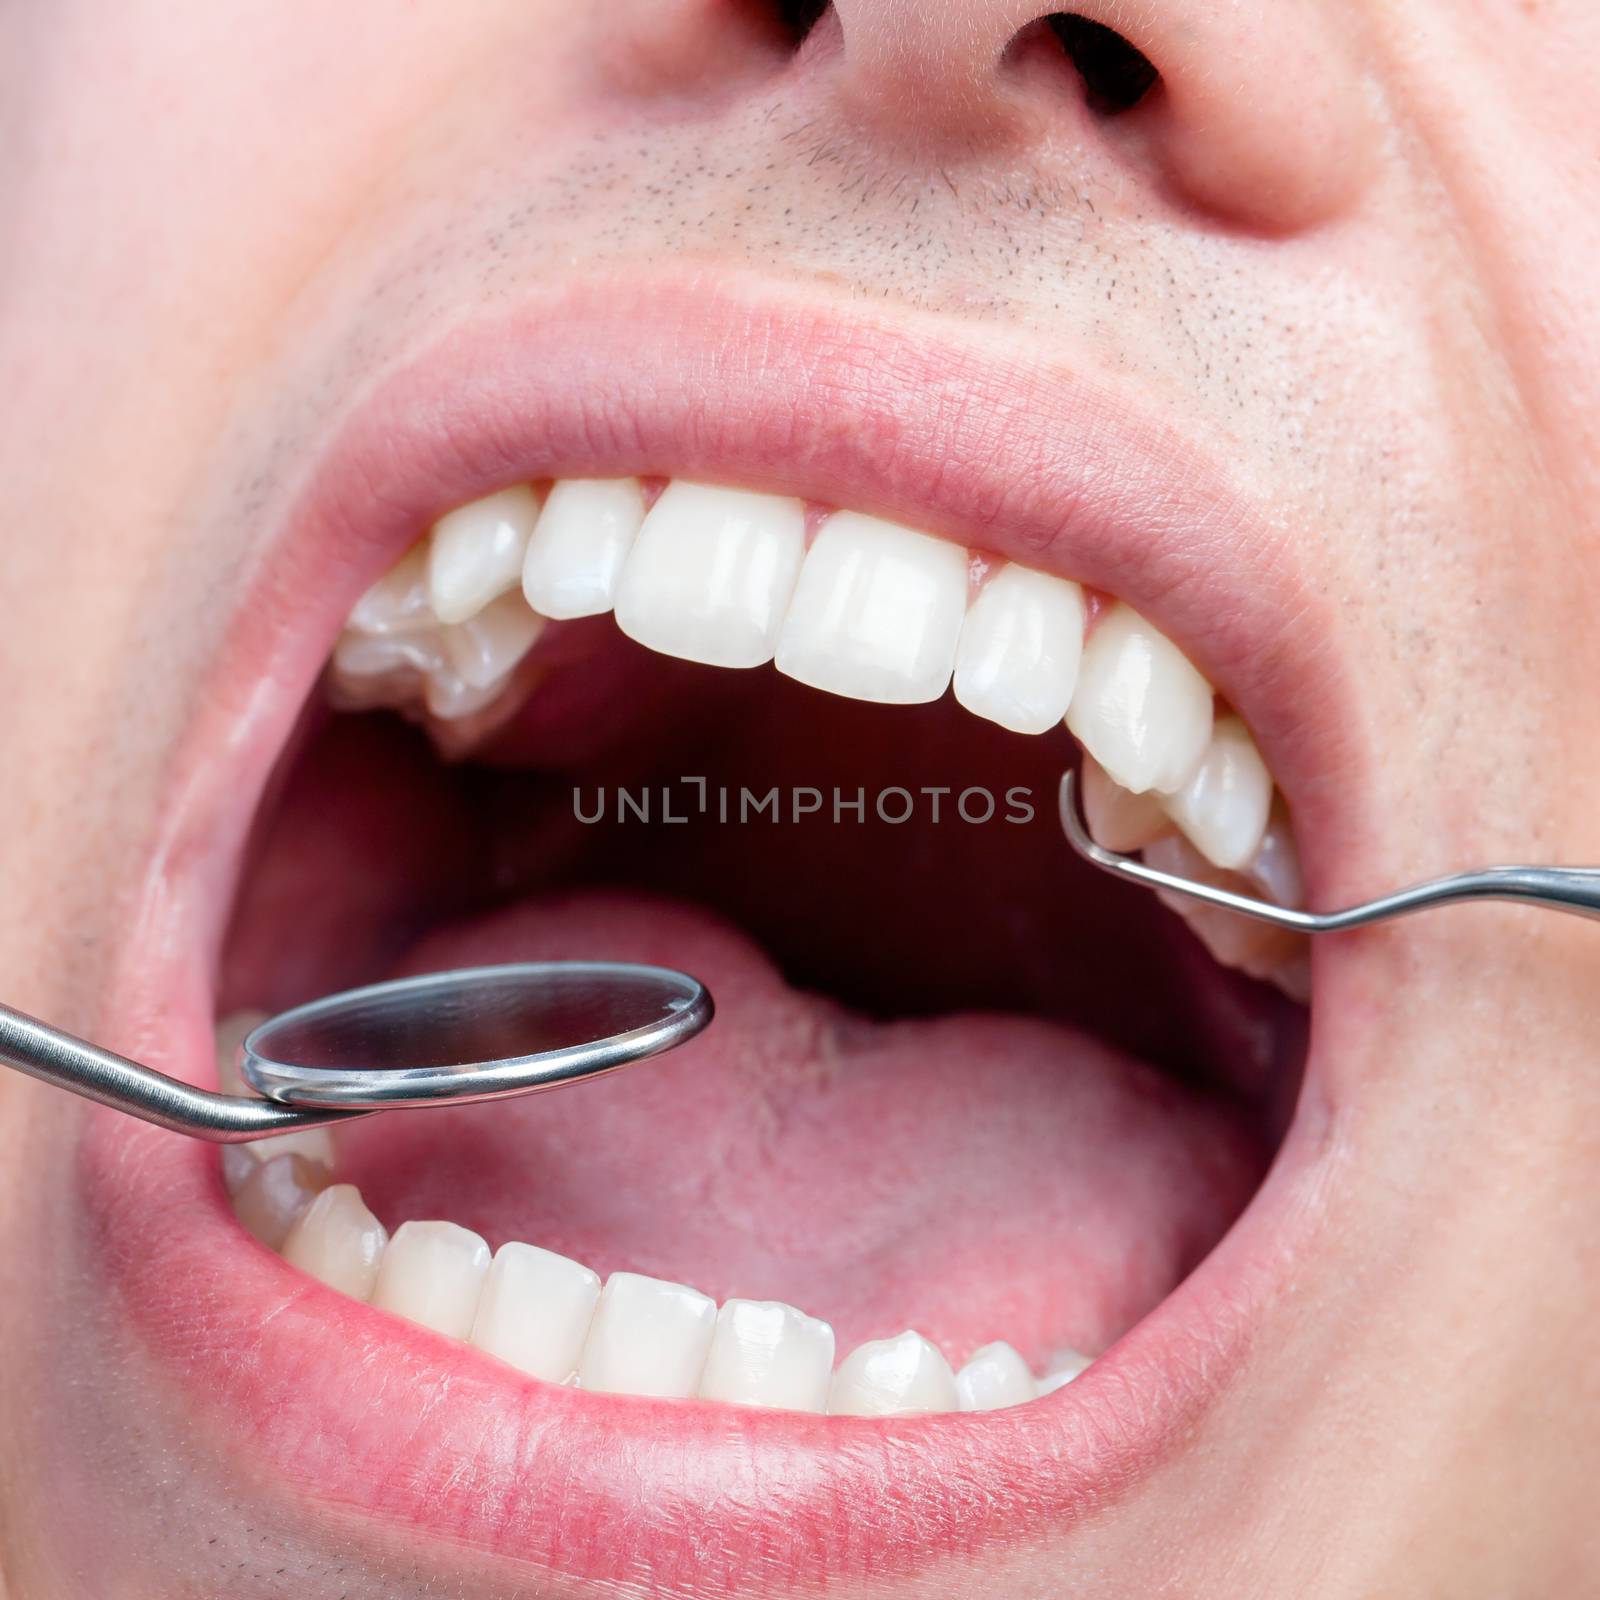 Human male mouth showing teeth with dental hatchet and mouth mir by karelnoppe